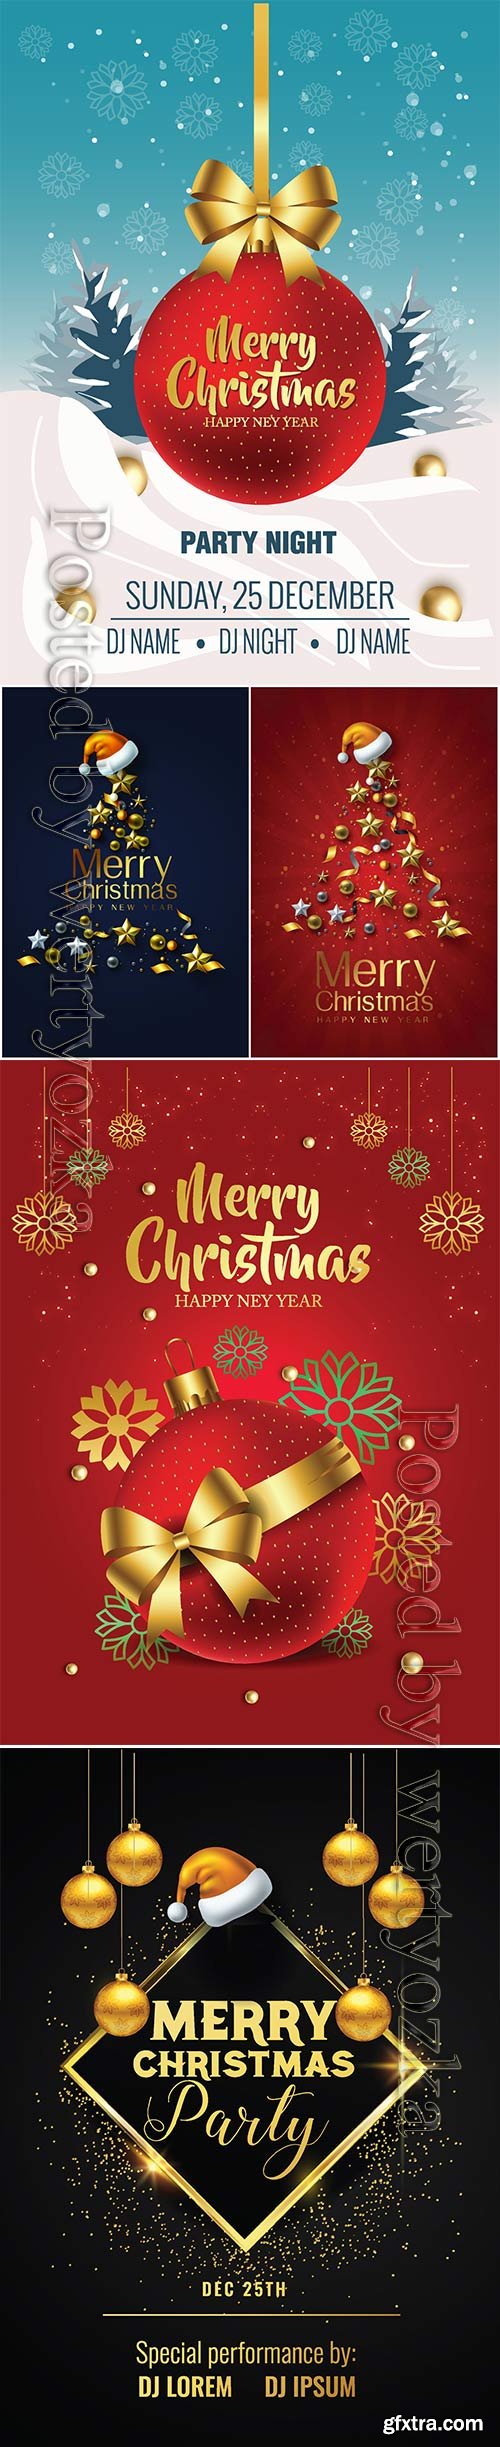 2020 Merry Chistmas and Happy New Year vector illustration